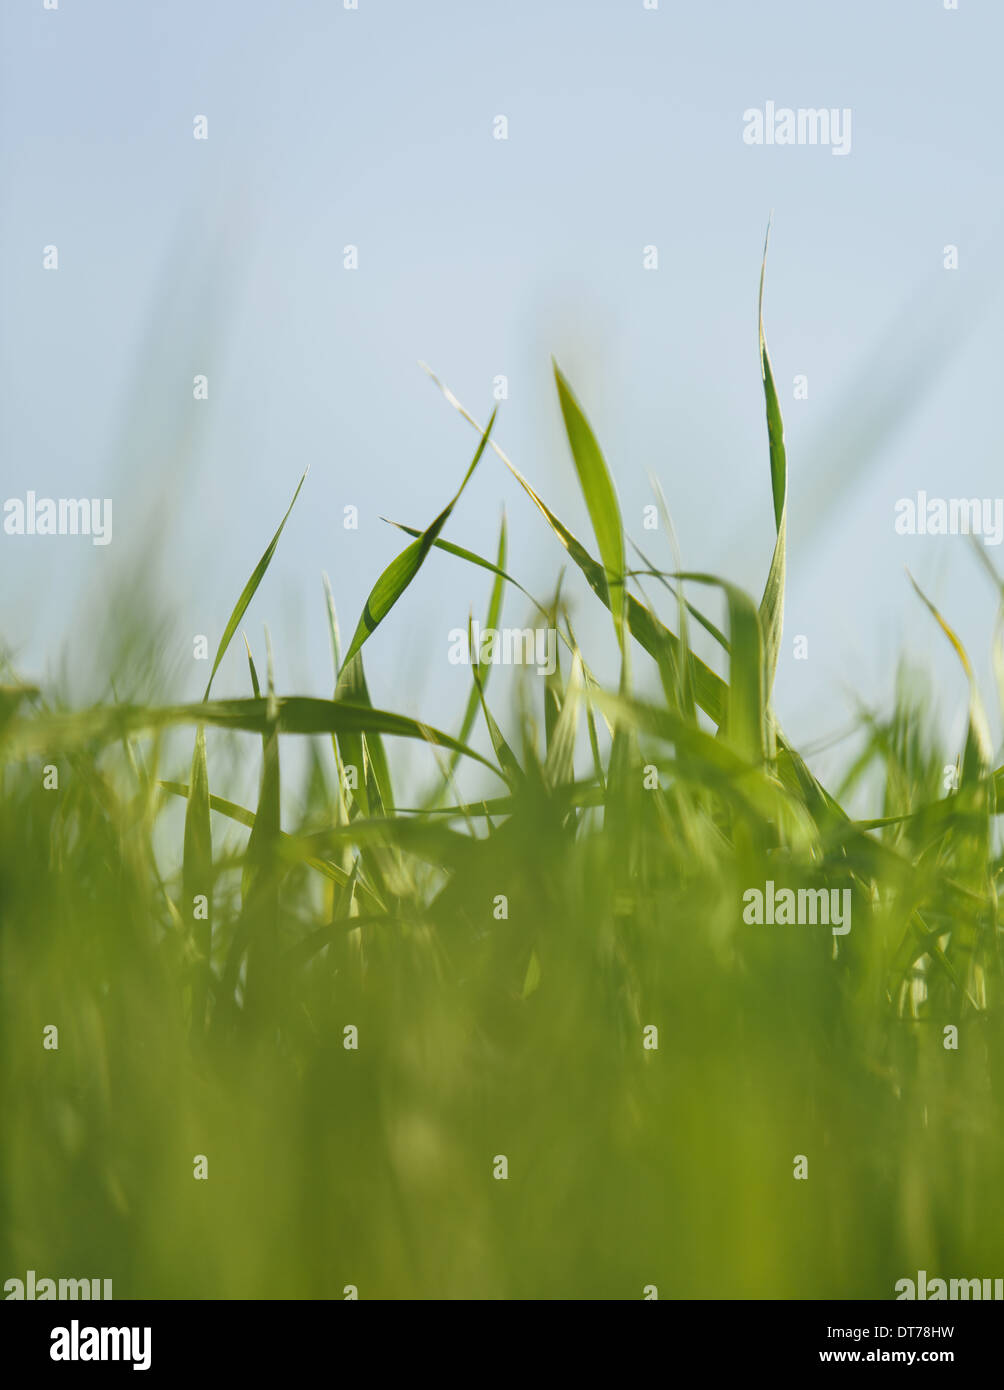 A close up view of a food crop, cultivated wheat growing in a field near Pullman, Washington, USA. Stock Photo